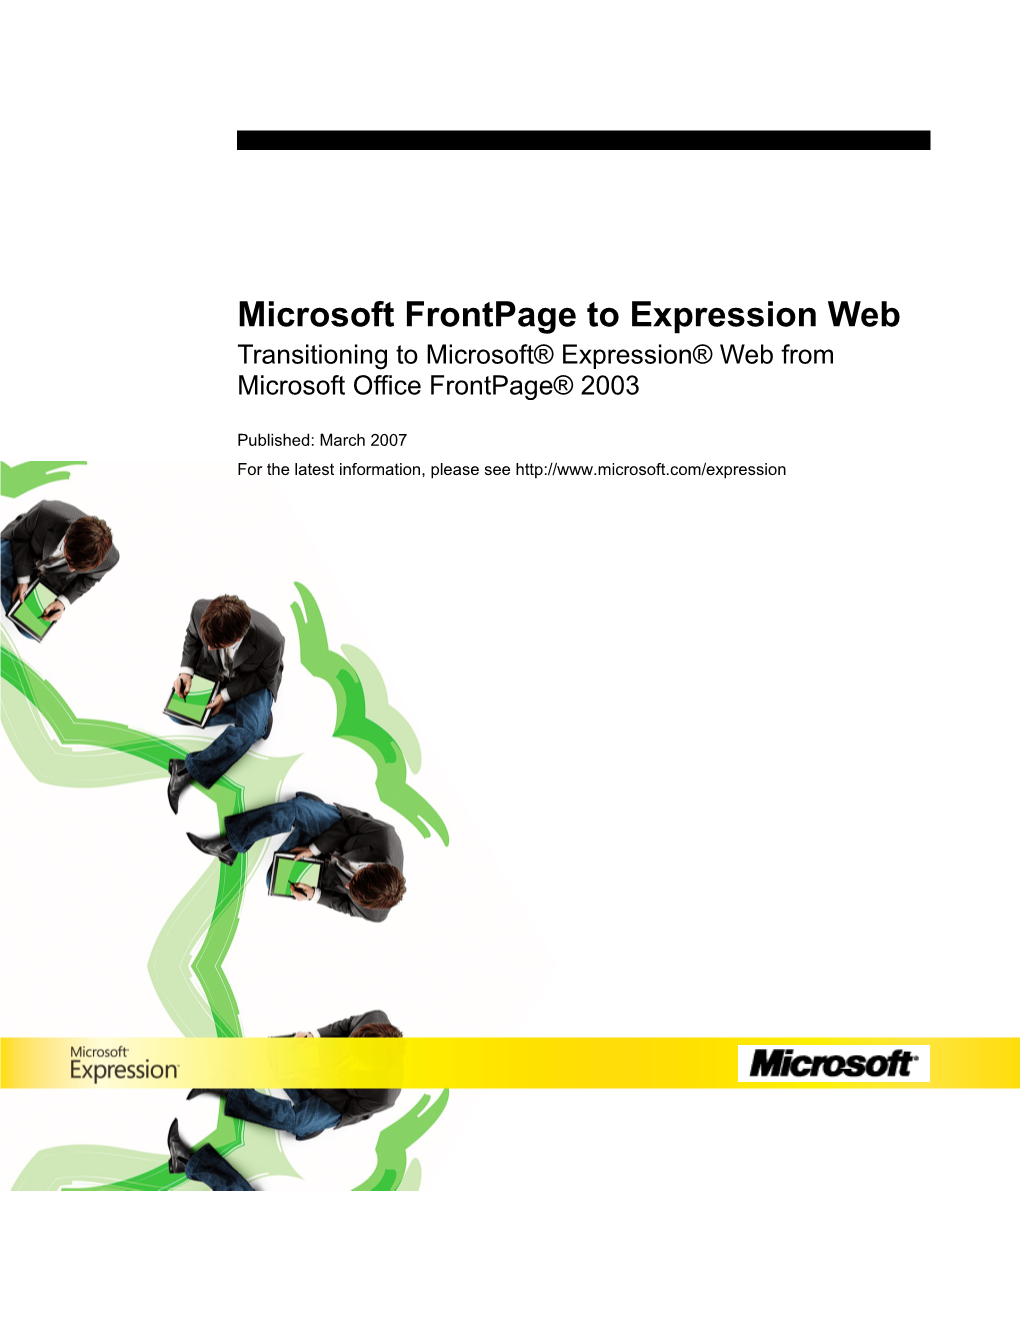 Microsoft Frontpage to Expression Web